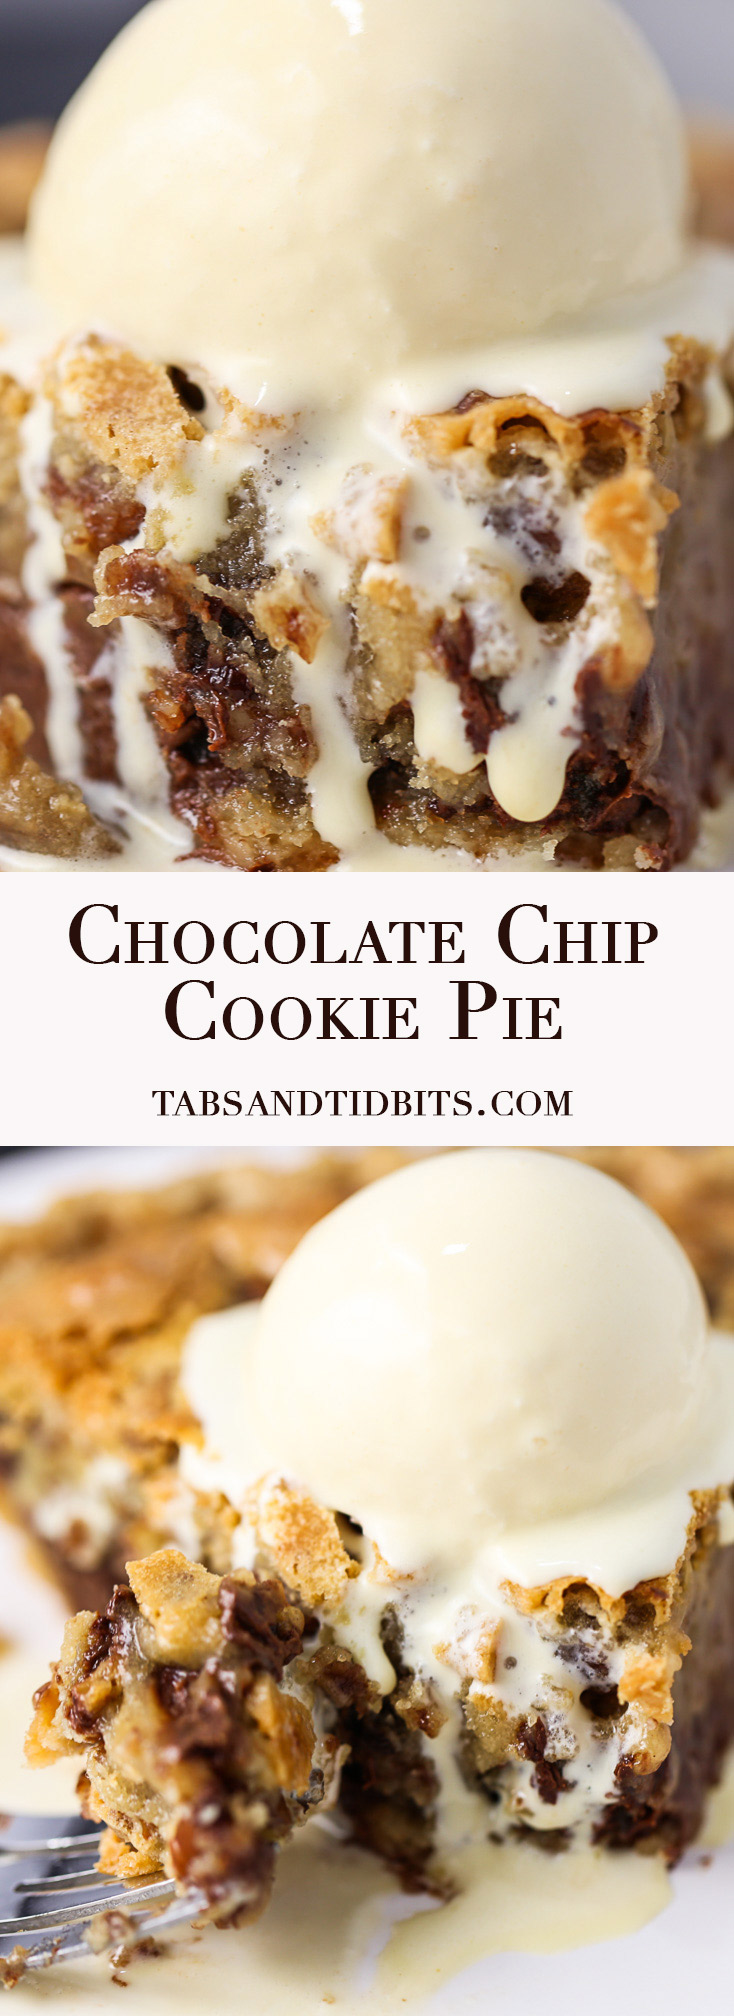 Chocolate Chip Cookie Pie - A sweet brown sugar and butter chocolate chip cookie batter baked into to pie perfection!